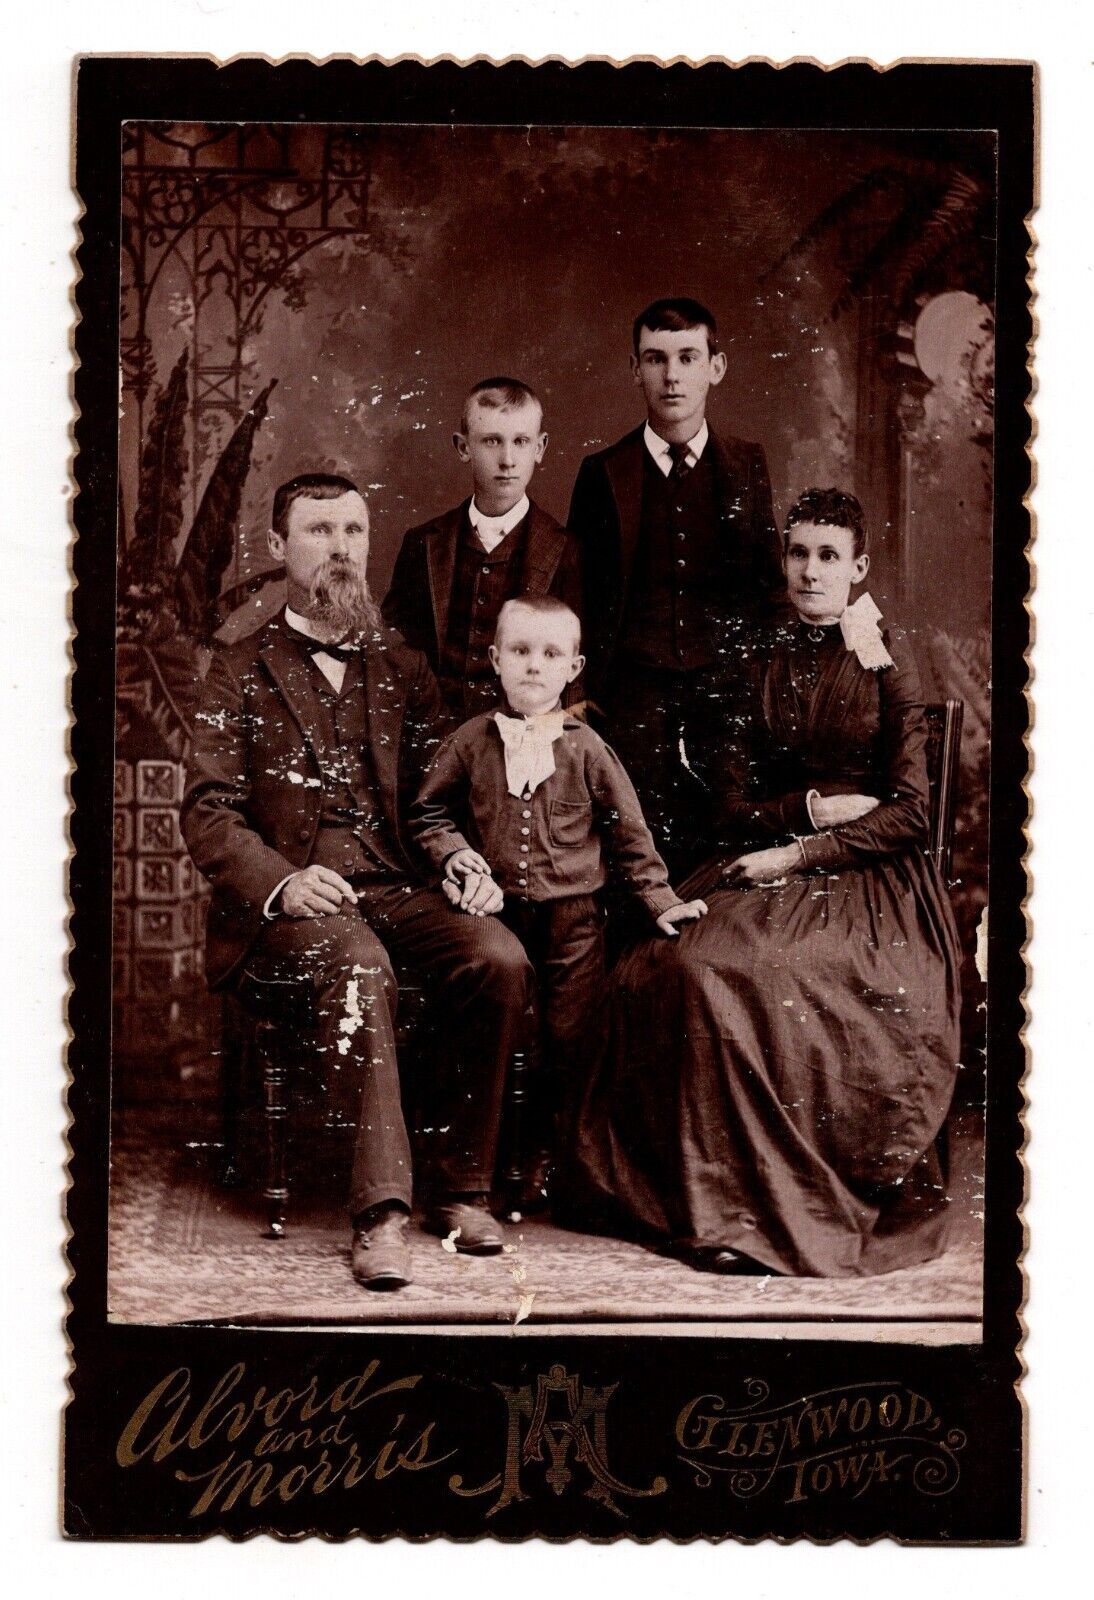 CIRCA 1880s CABINET CARD MORRIS FAMILY OF FIVE FORMAL CLOTHING GLENWOOD IOWA